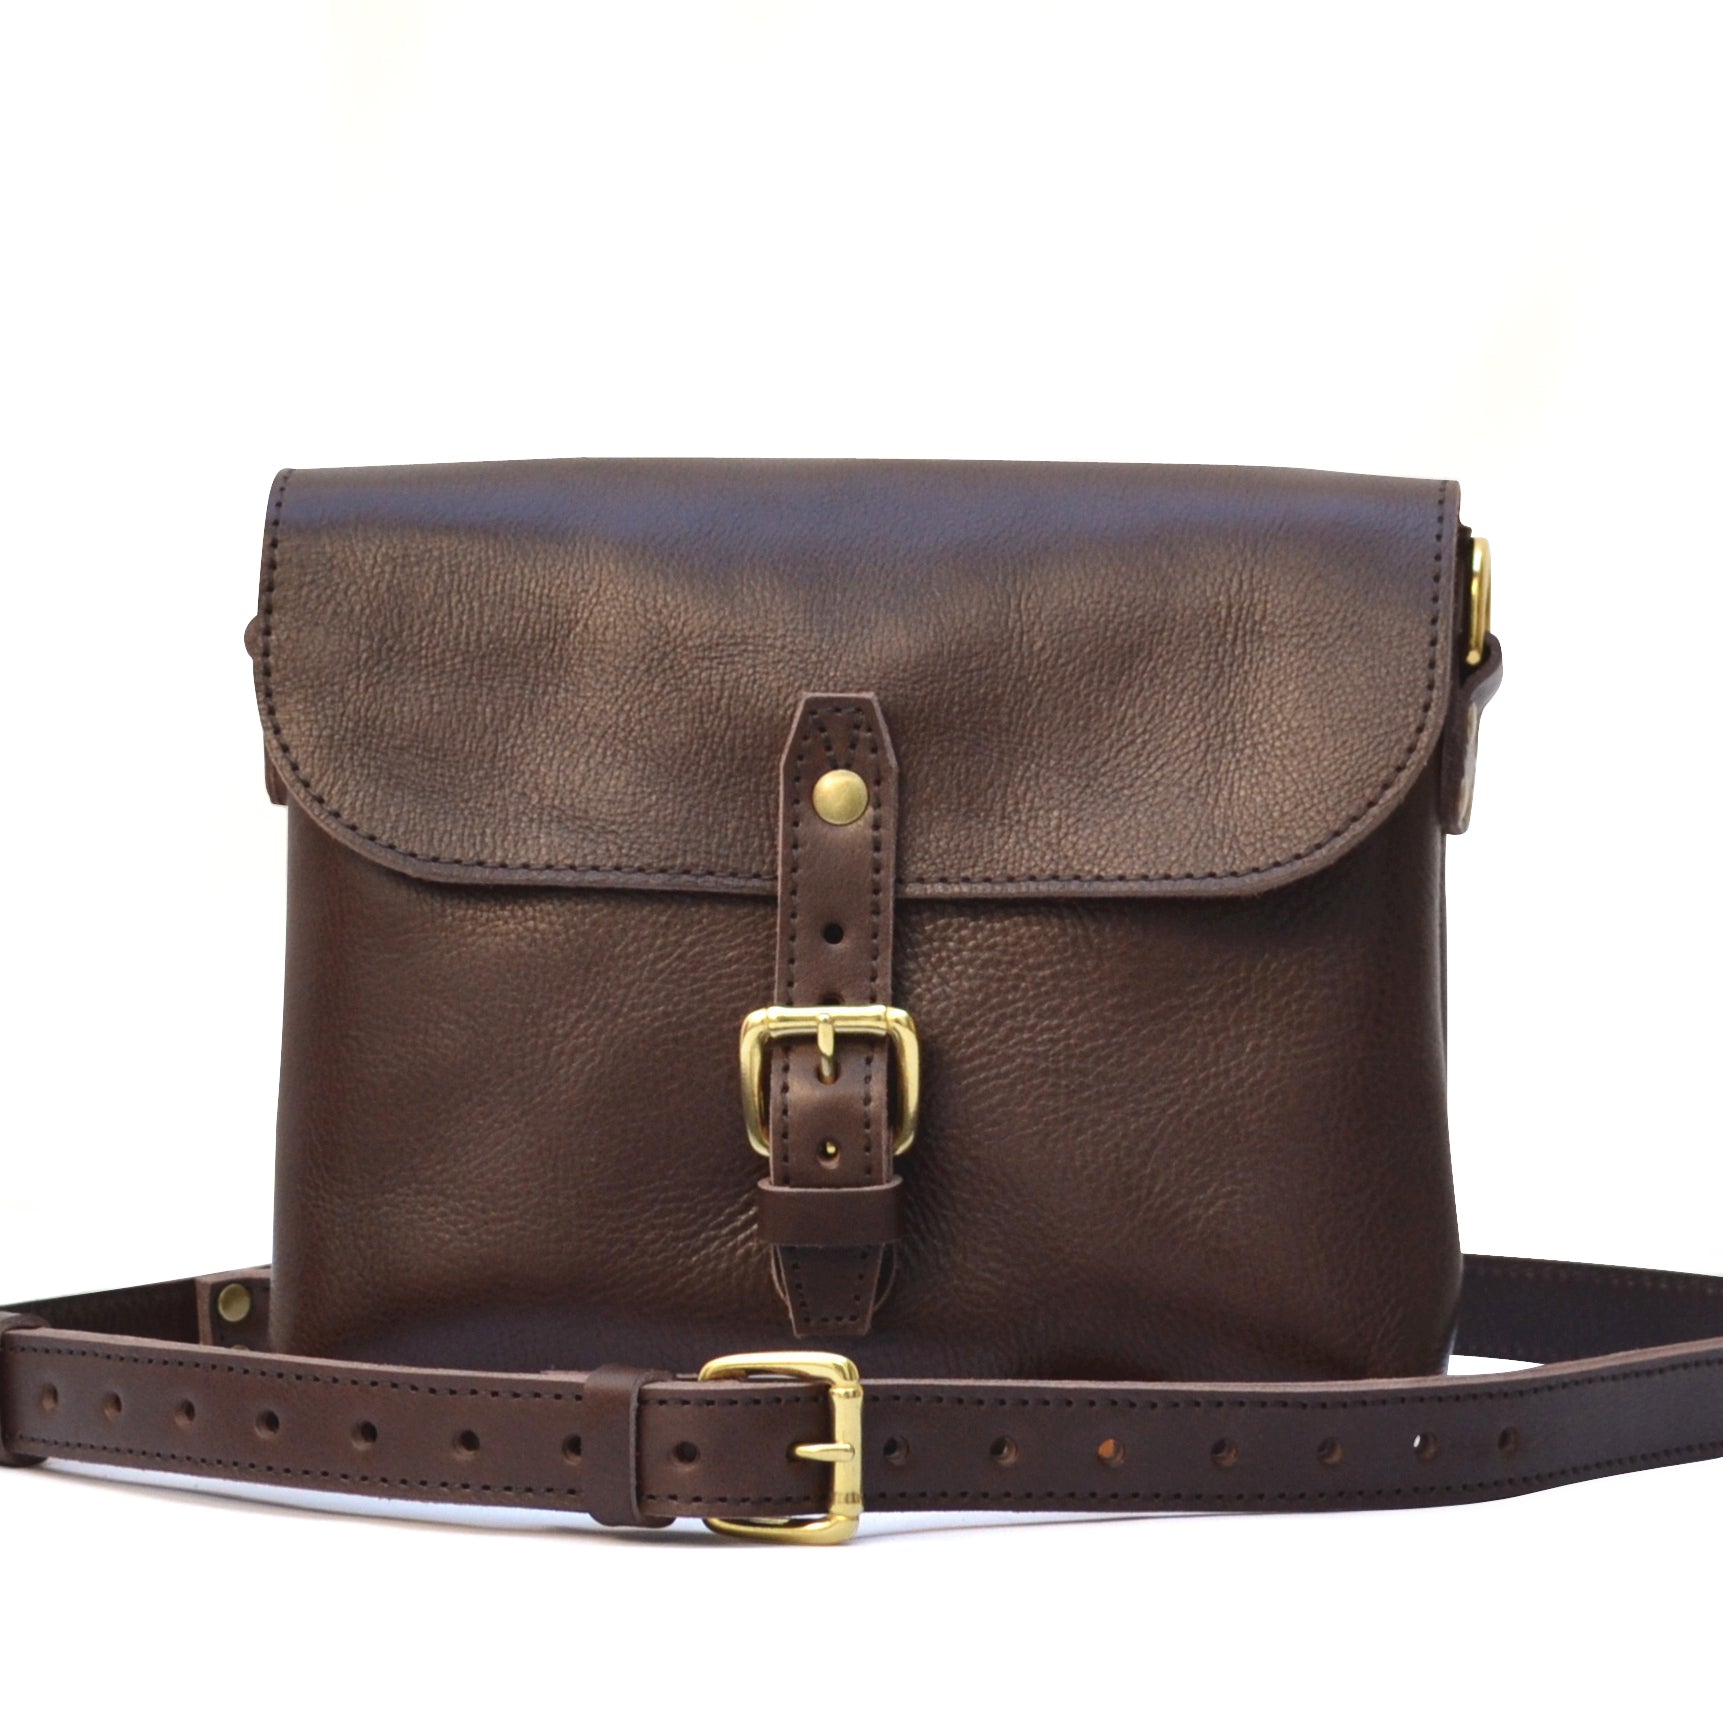 Is a Messenger Bag a Purse? [What are the differences] - Domini Leather